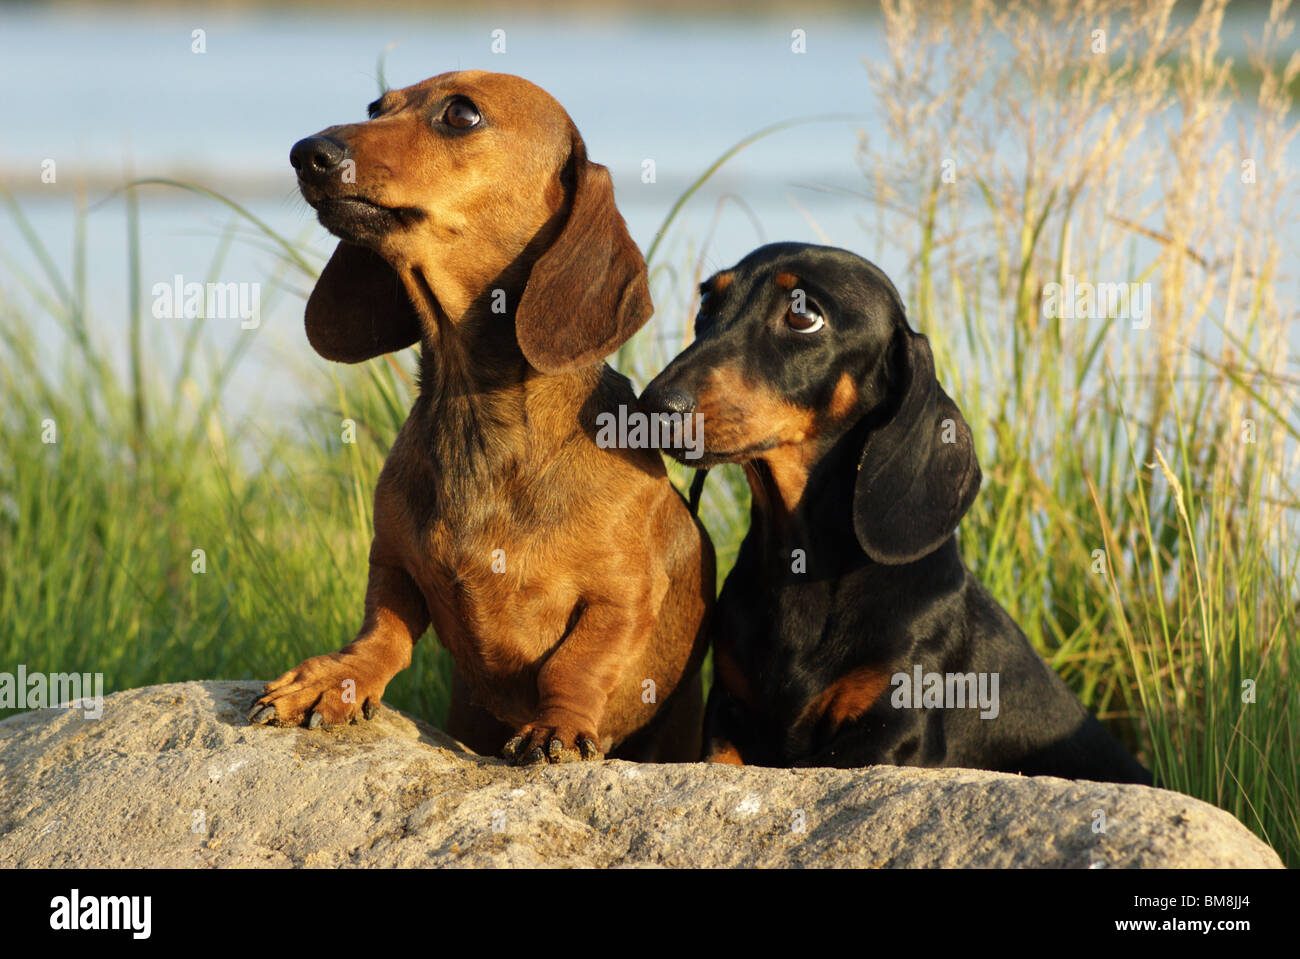 Two Dachshunds. Stock Photo